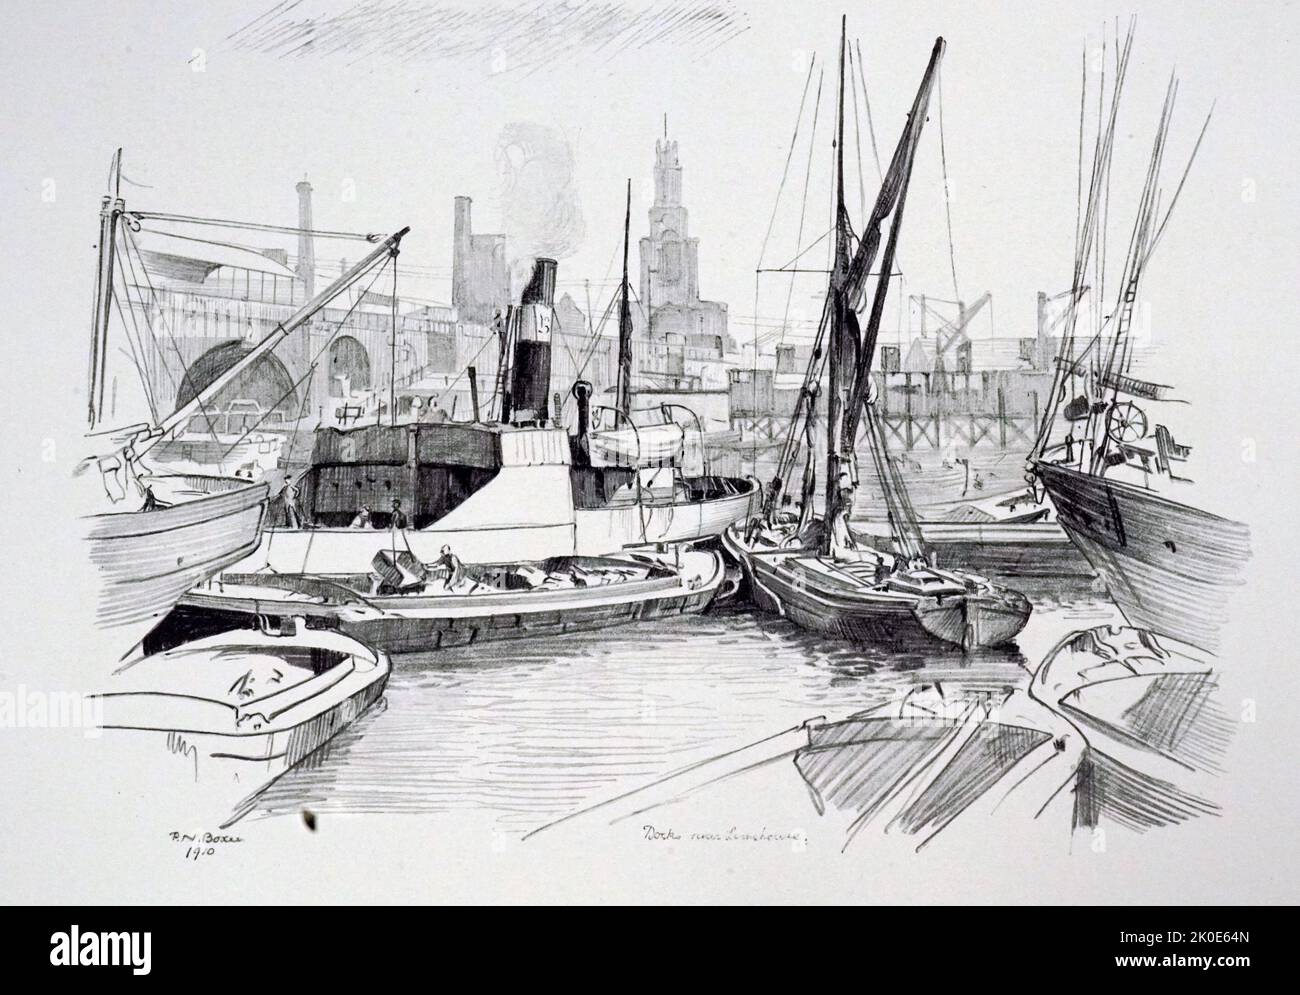 Docks near Limehouse by Percy Noel Boxer. Drawing, inscribed with signature, title, and date, 1910. Stock Photo